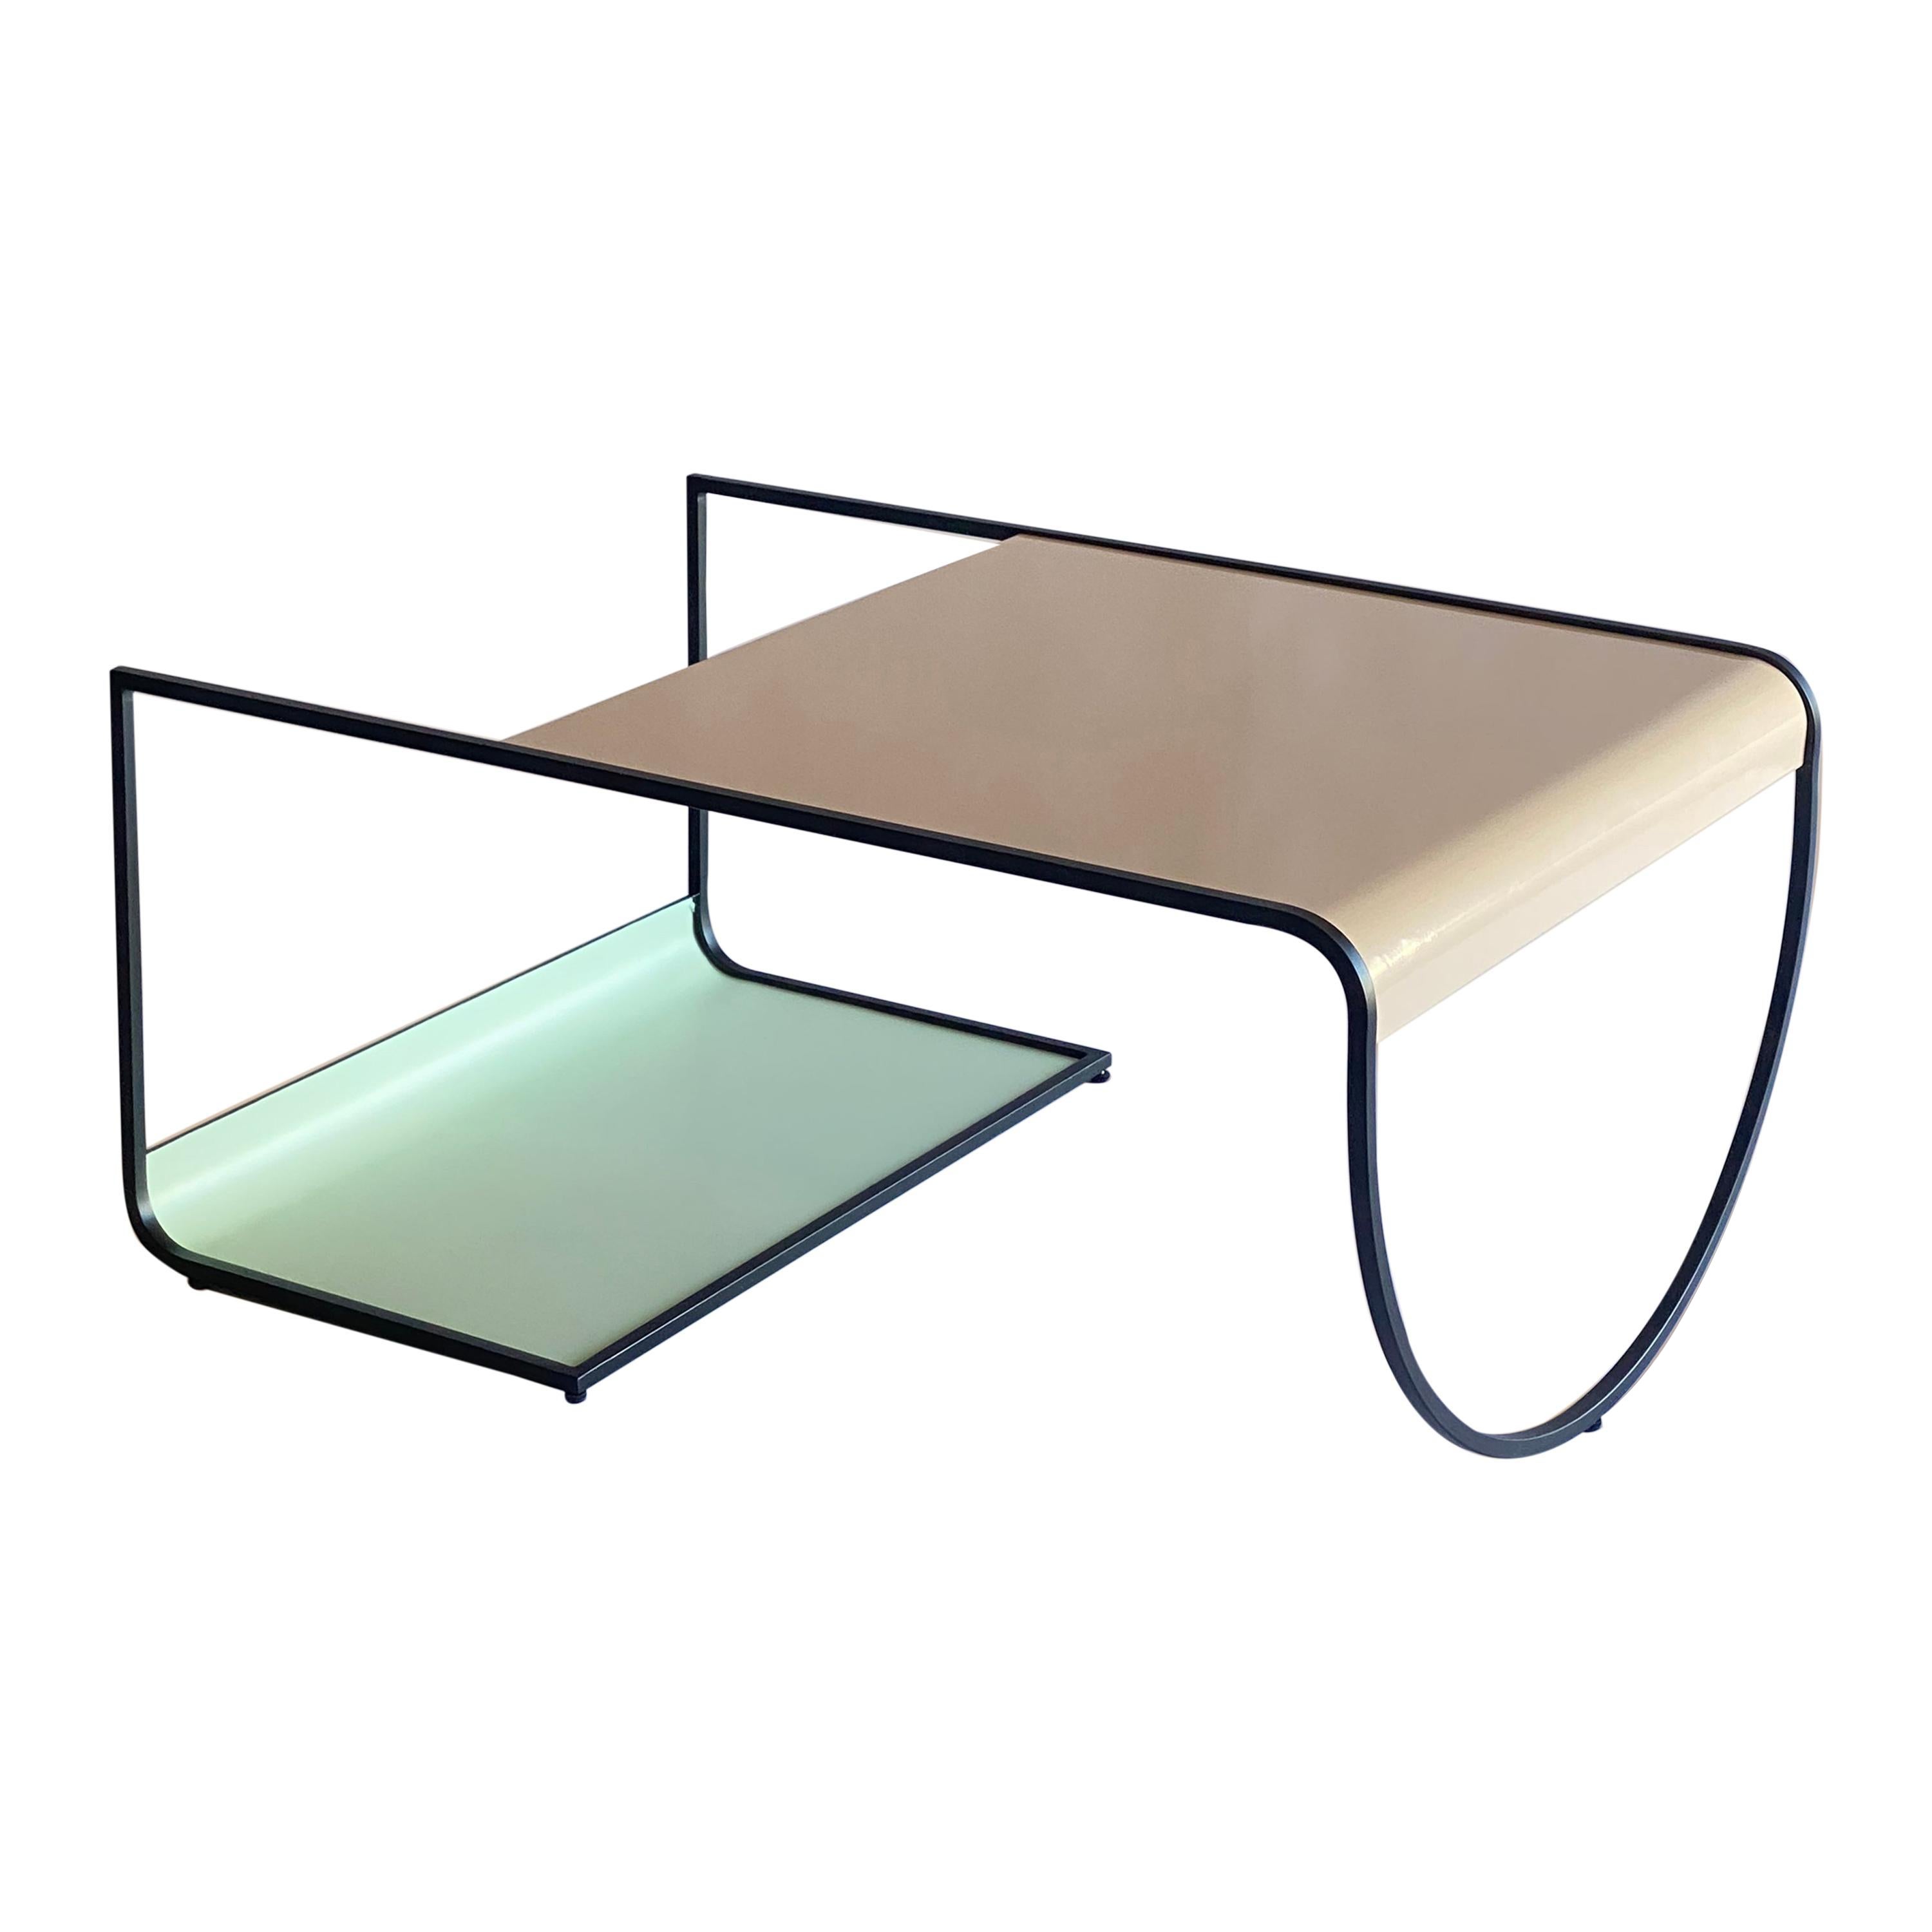 Steel SW Coffee Table by Soft-Geometry For Sale